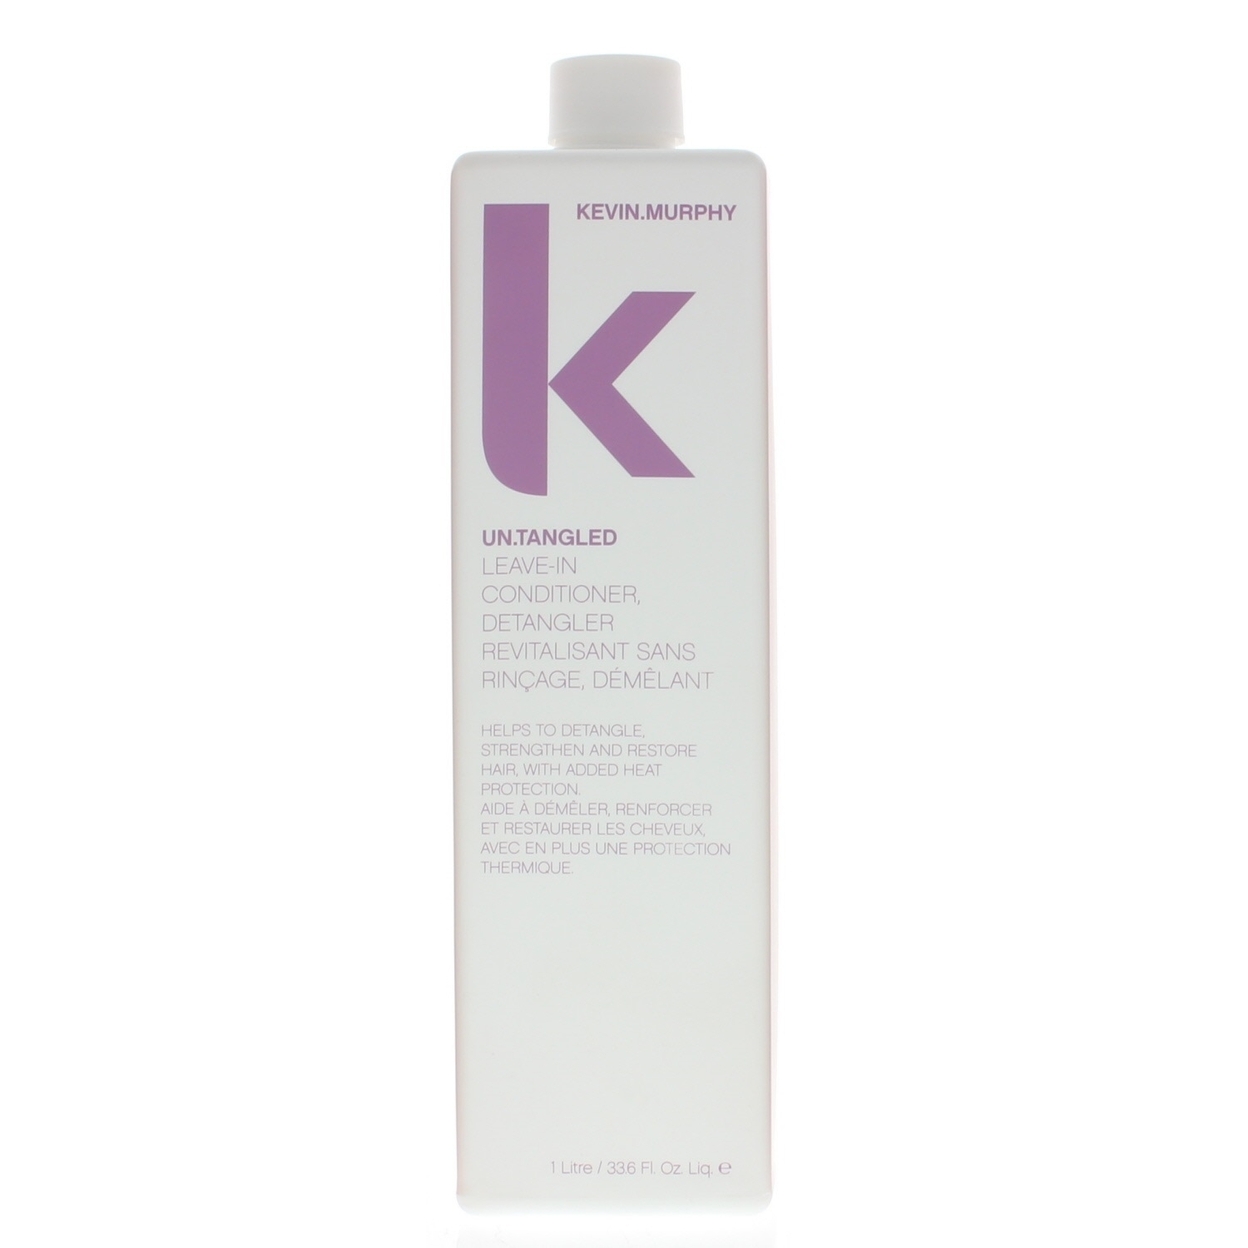 Kevin Murphy Un Tangled Leave-In Conditioner 33.6oz/1 Liter